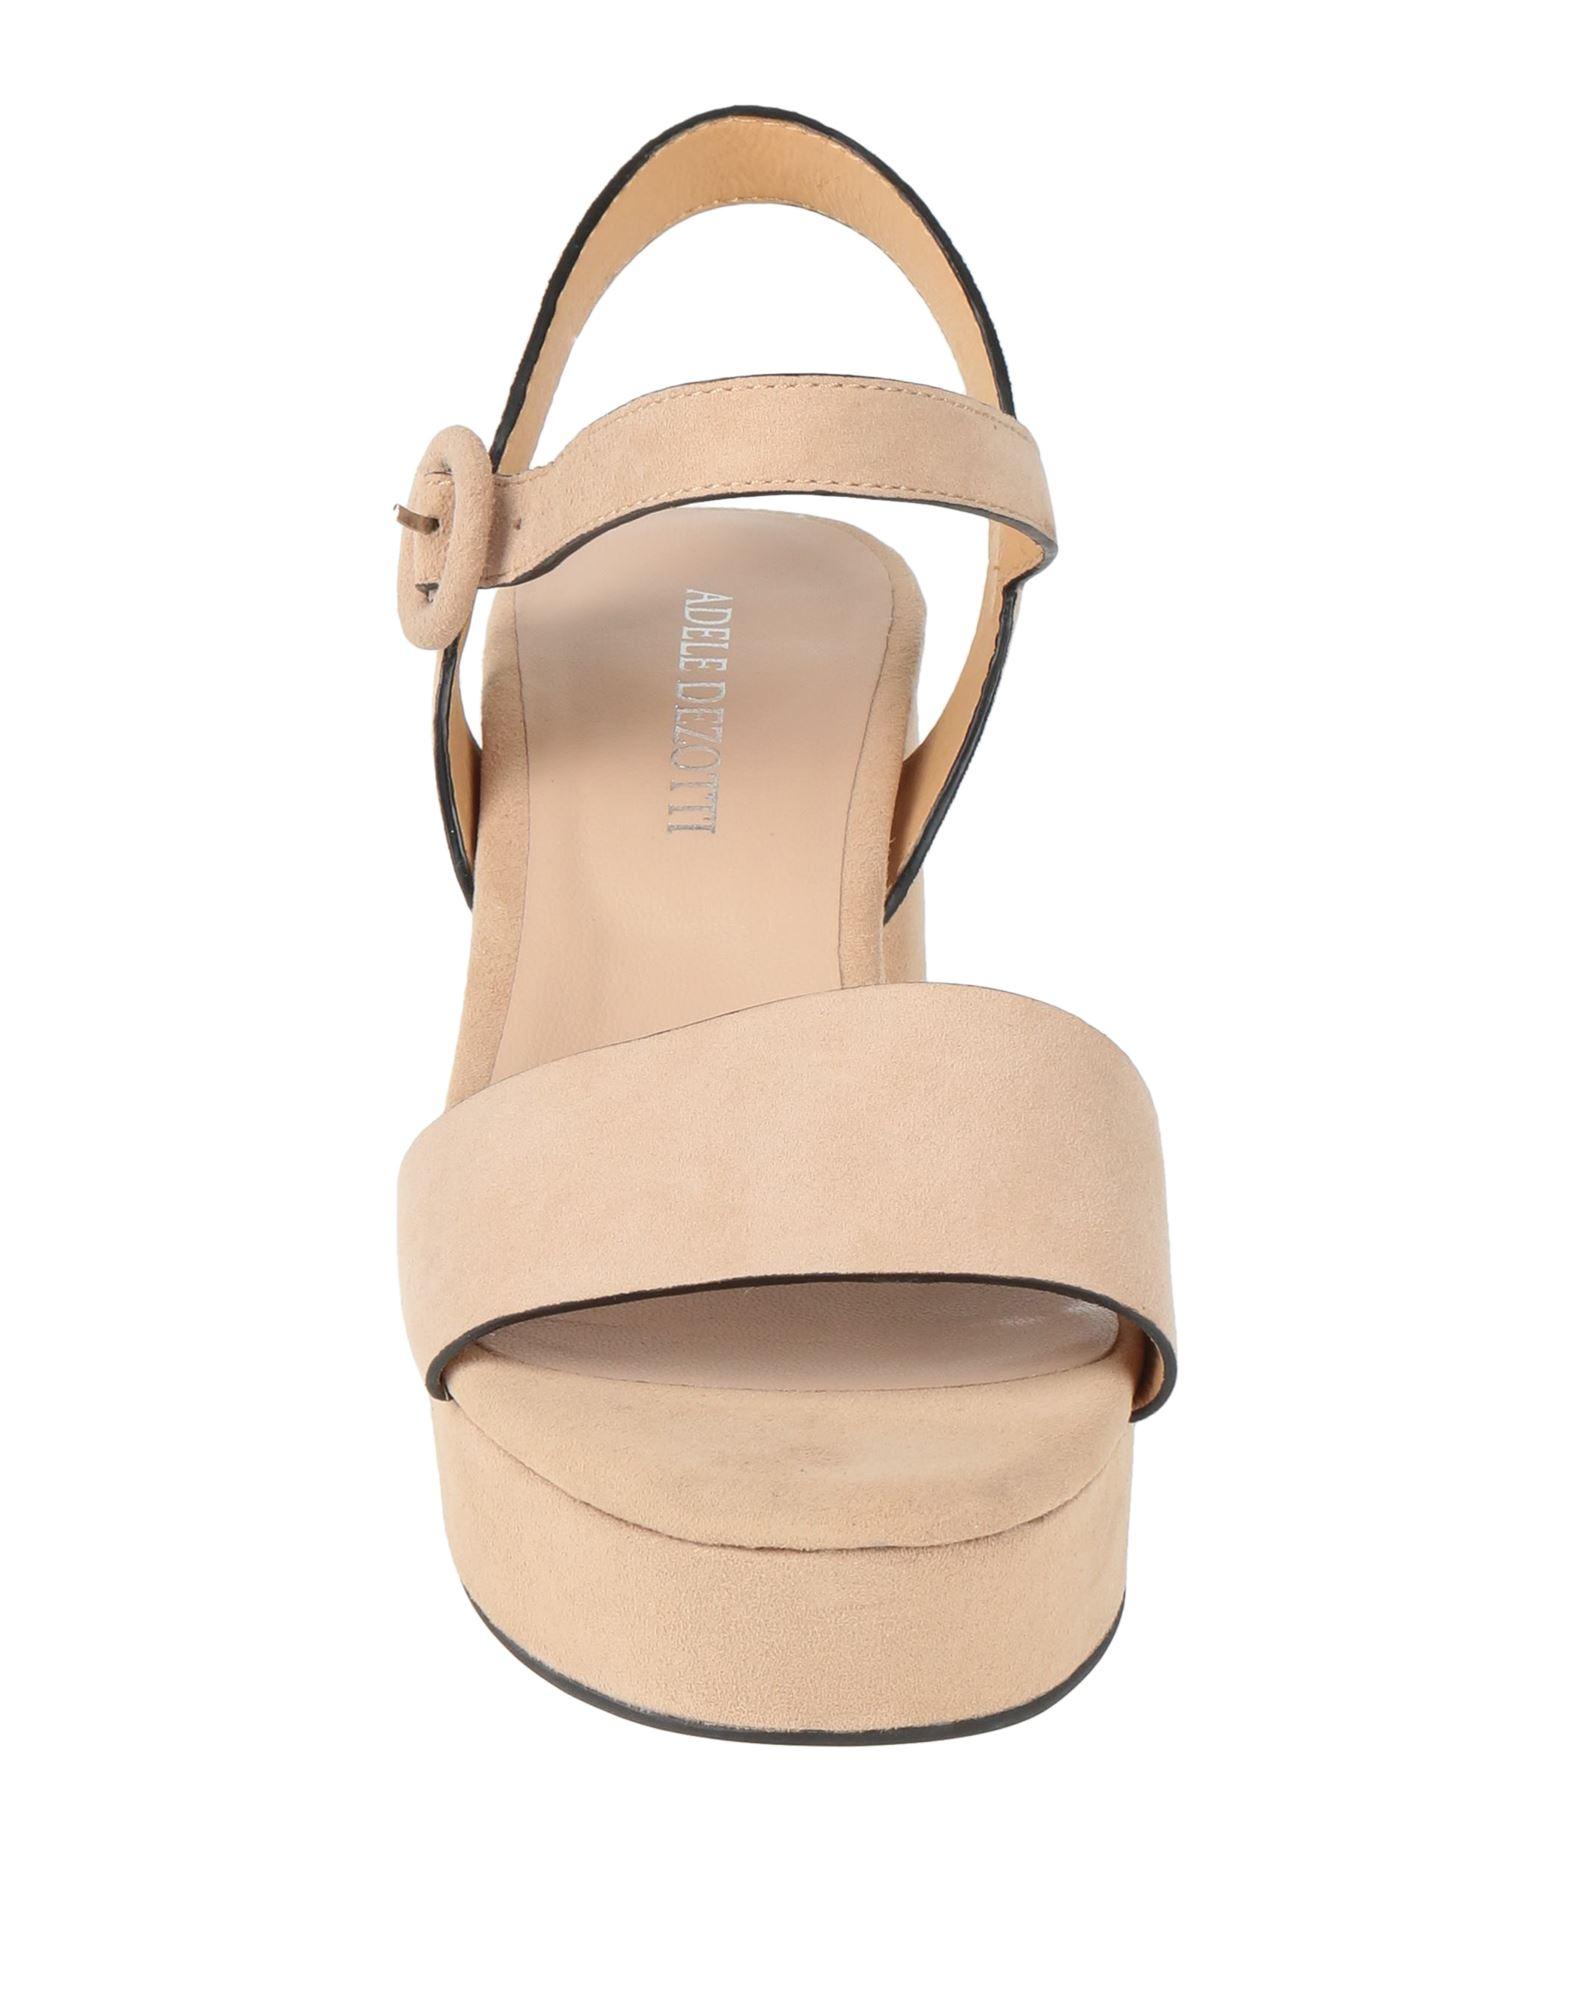 Adele Dezotti Sandals in Natural | Lyst